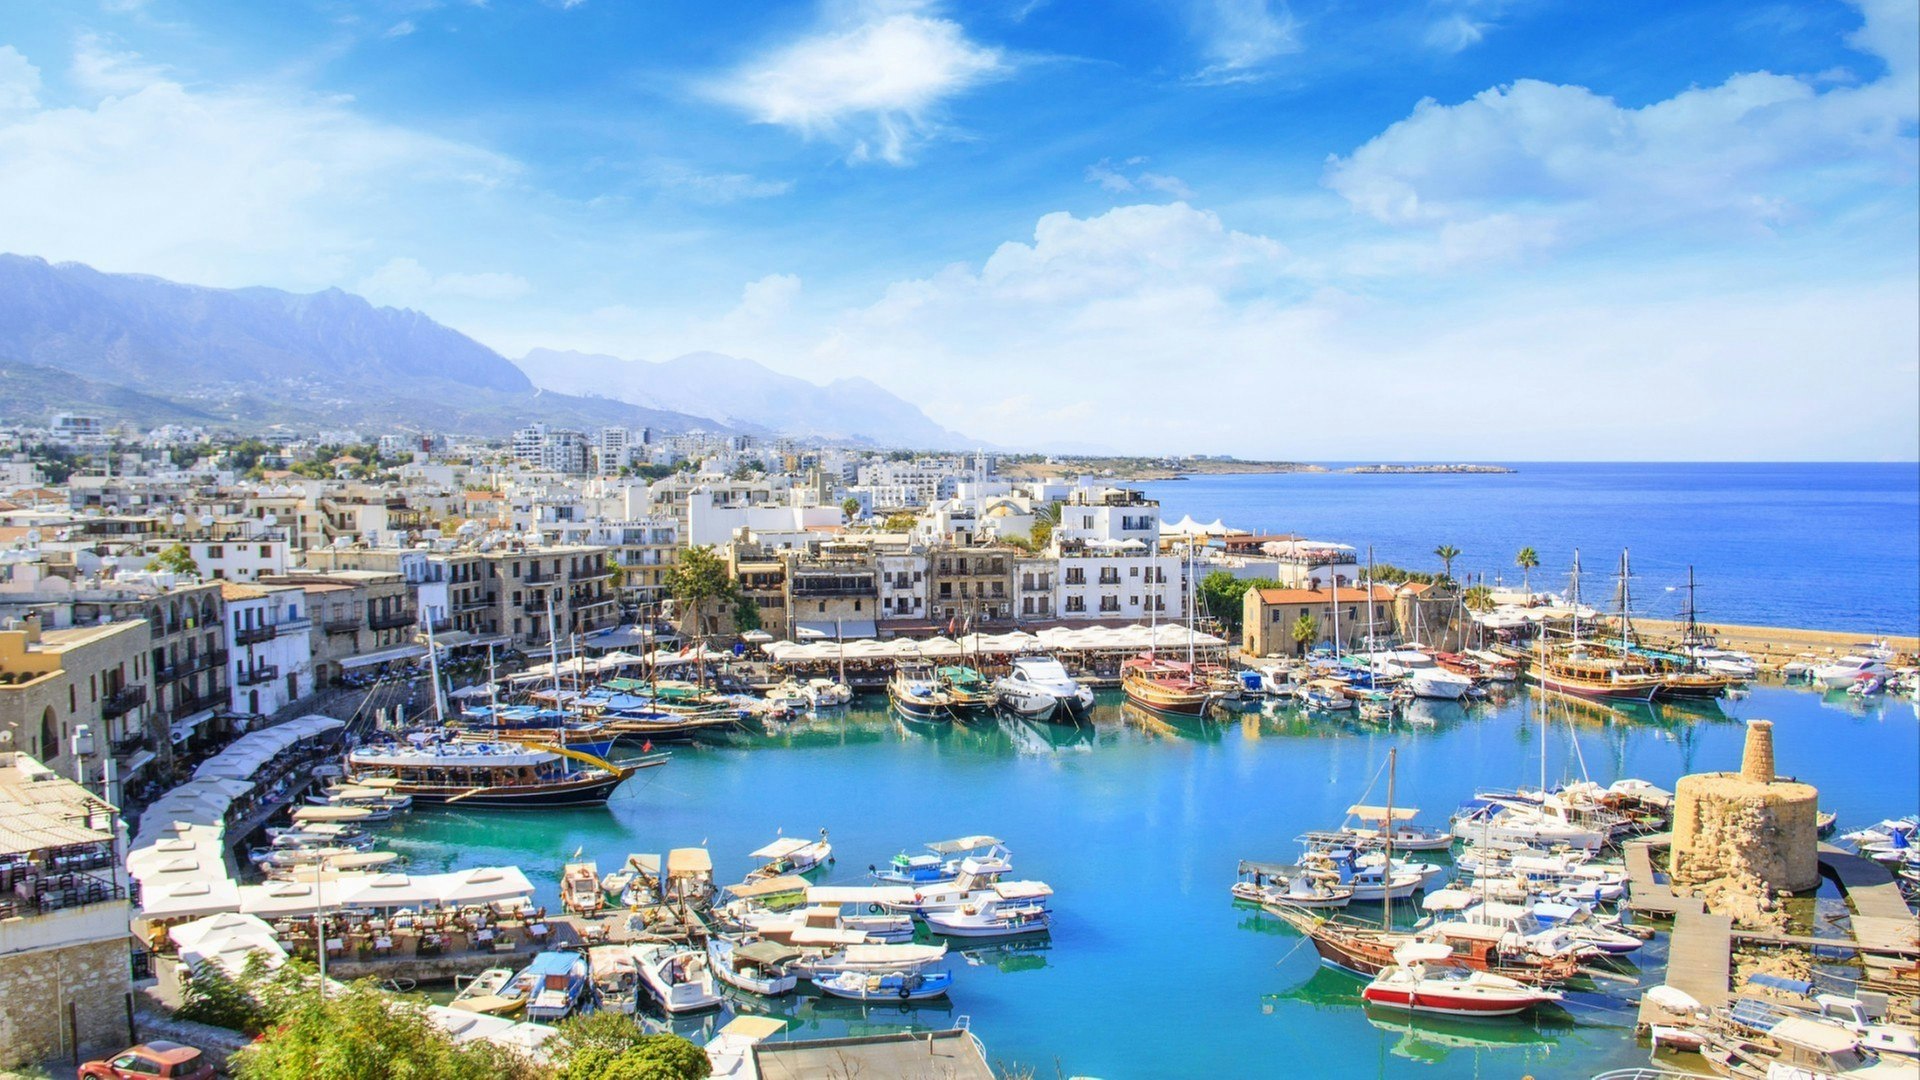 Beautiful view of the new port of Kyrenia (Girne), North Cyprus